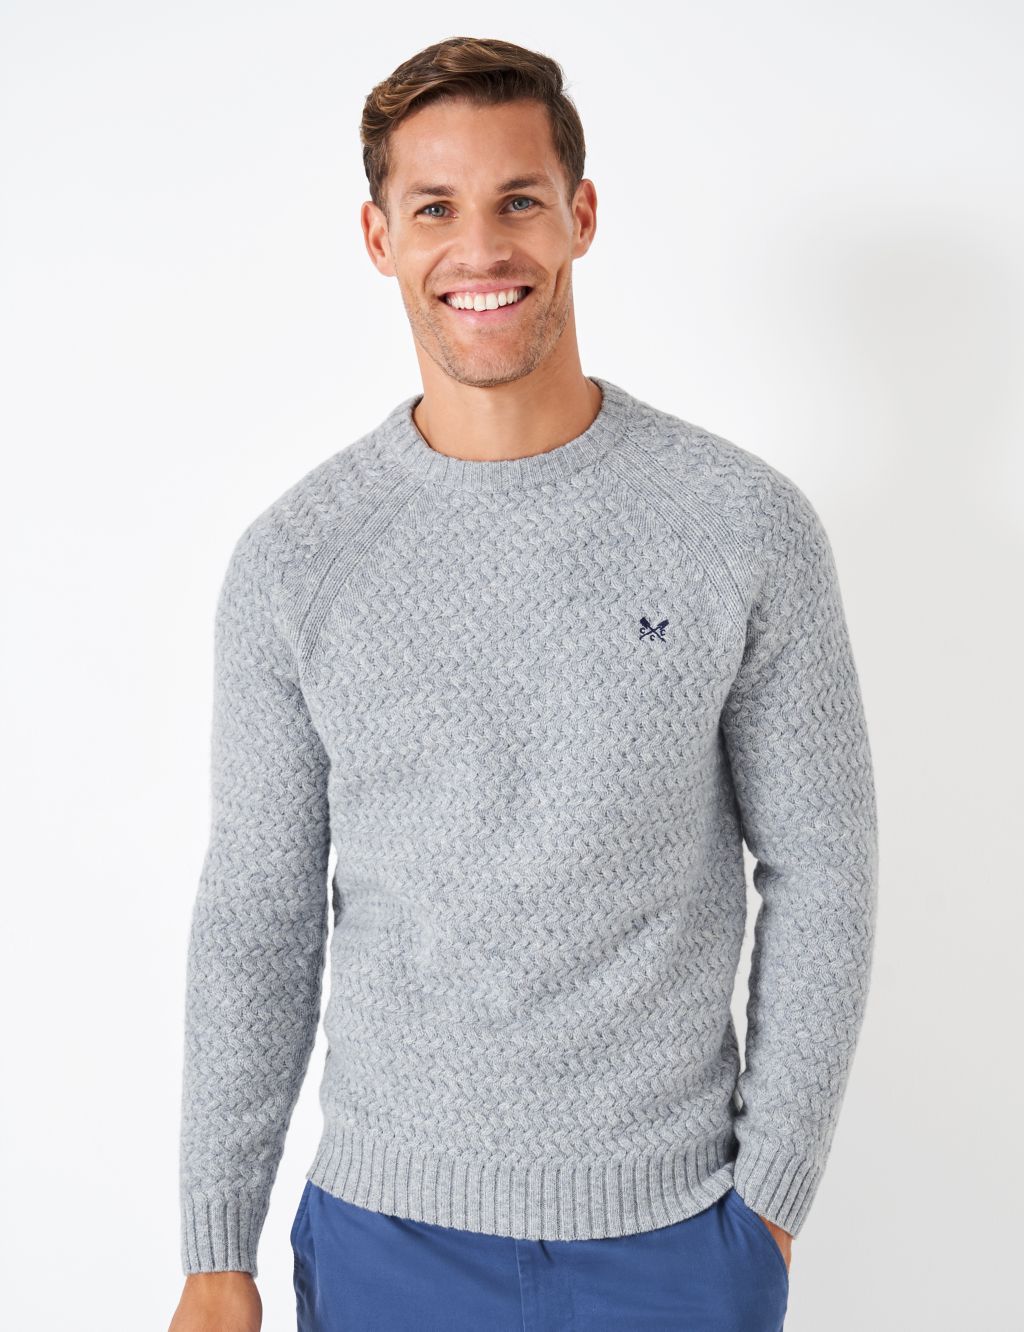 Lambswool Rich Cable Crew Neck Jumper image 1